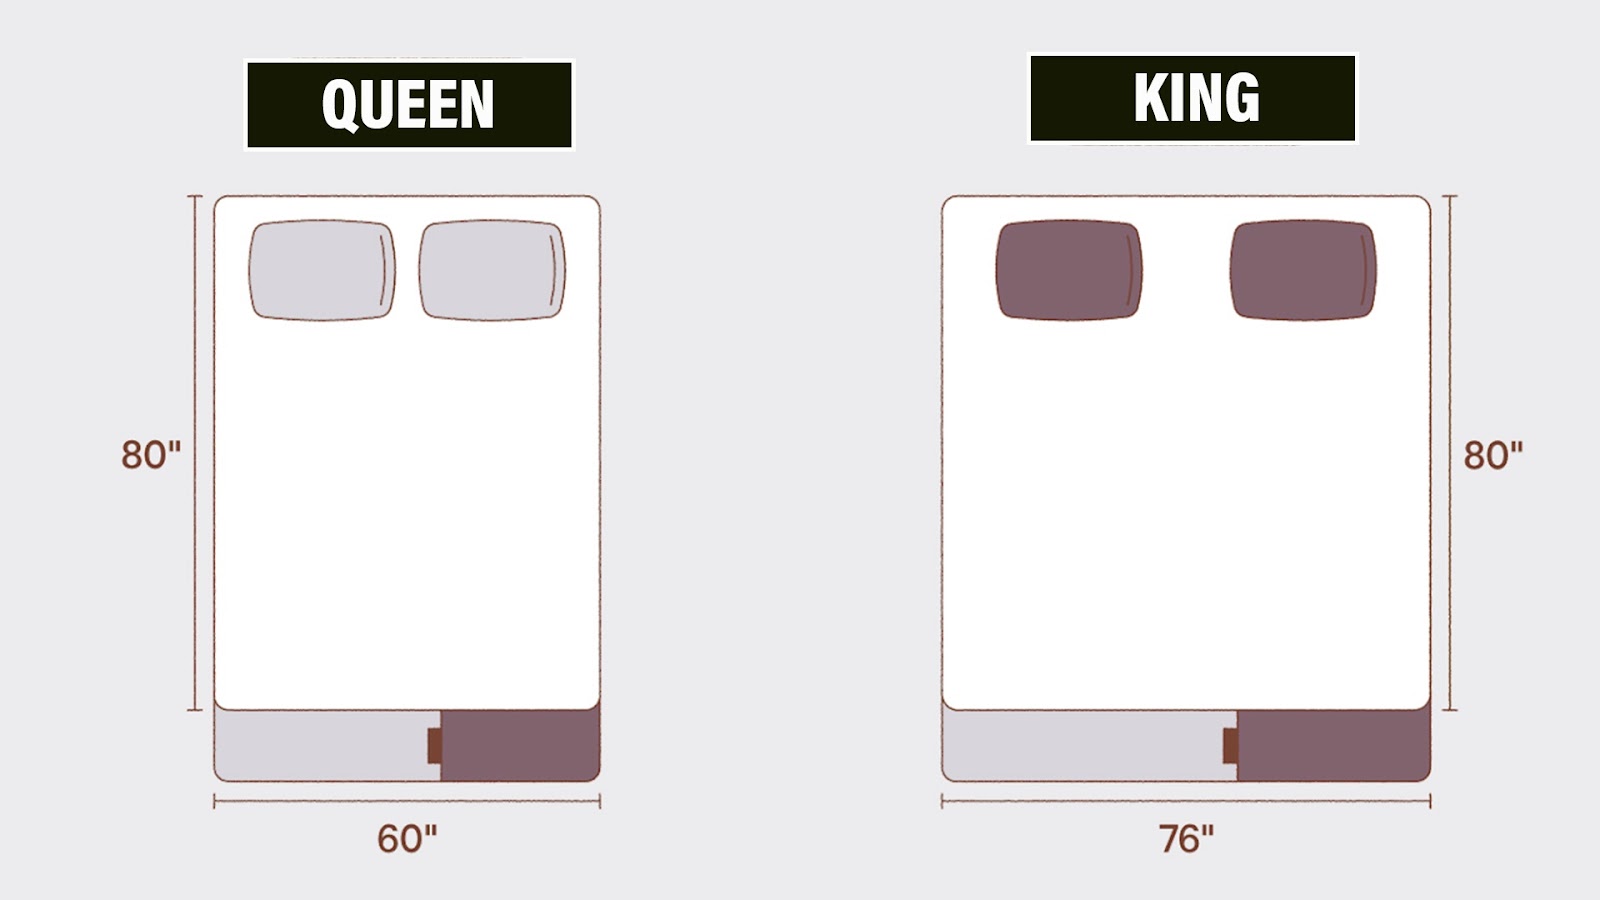 Which Bed is Bigger: Queen or King?